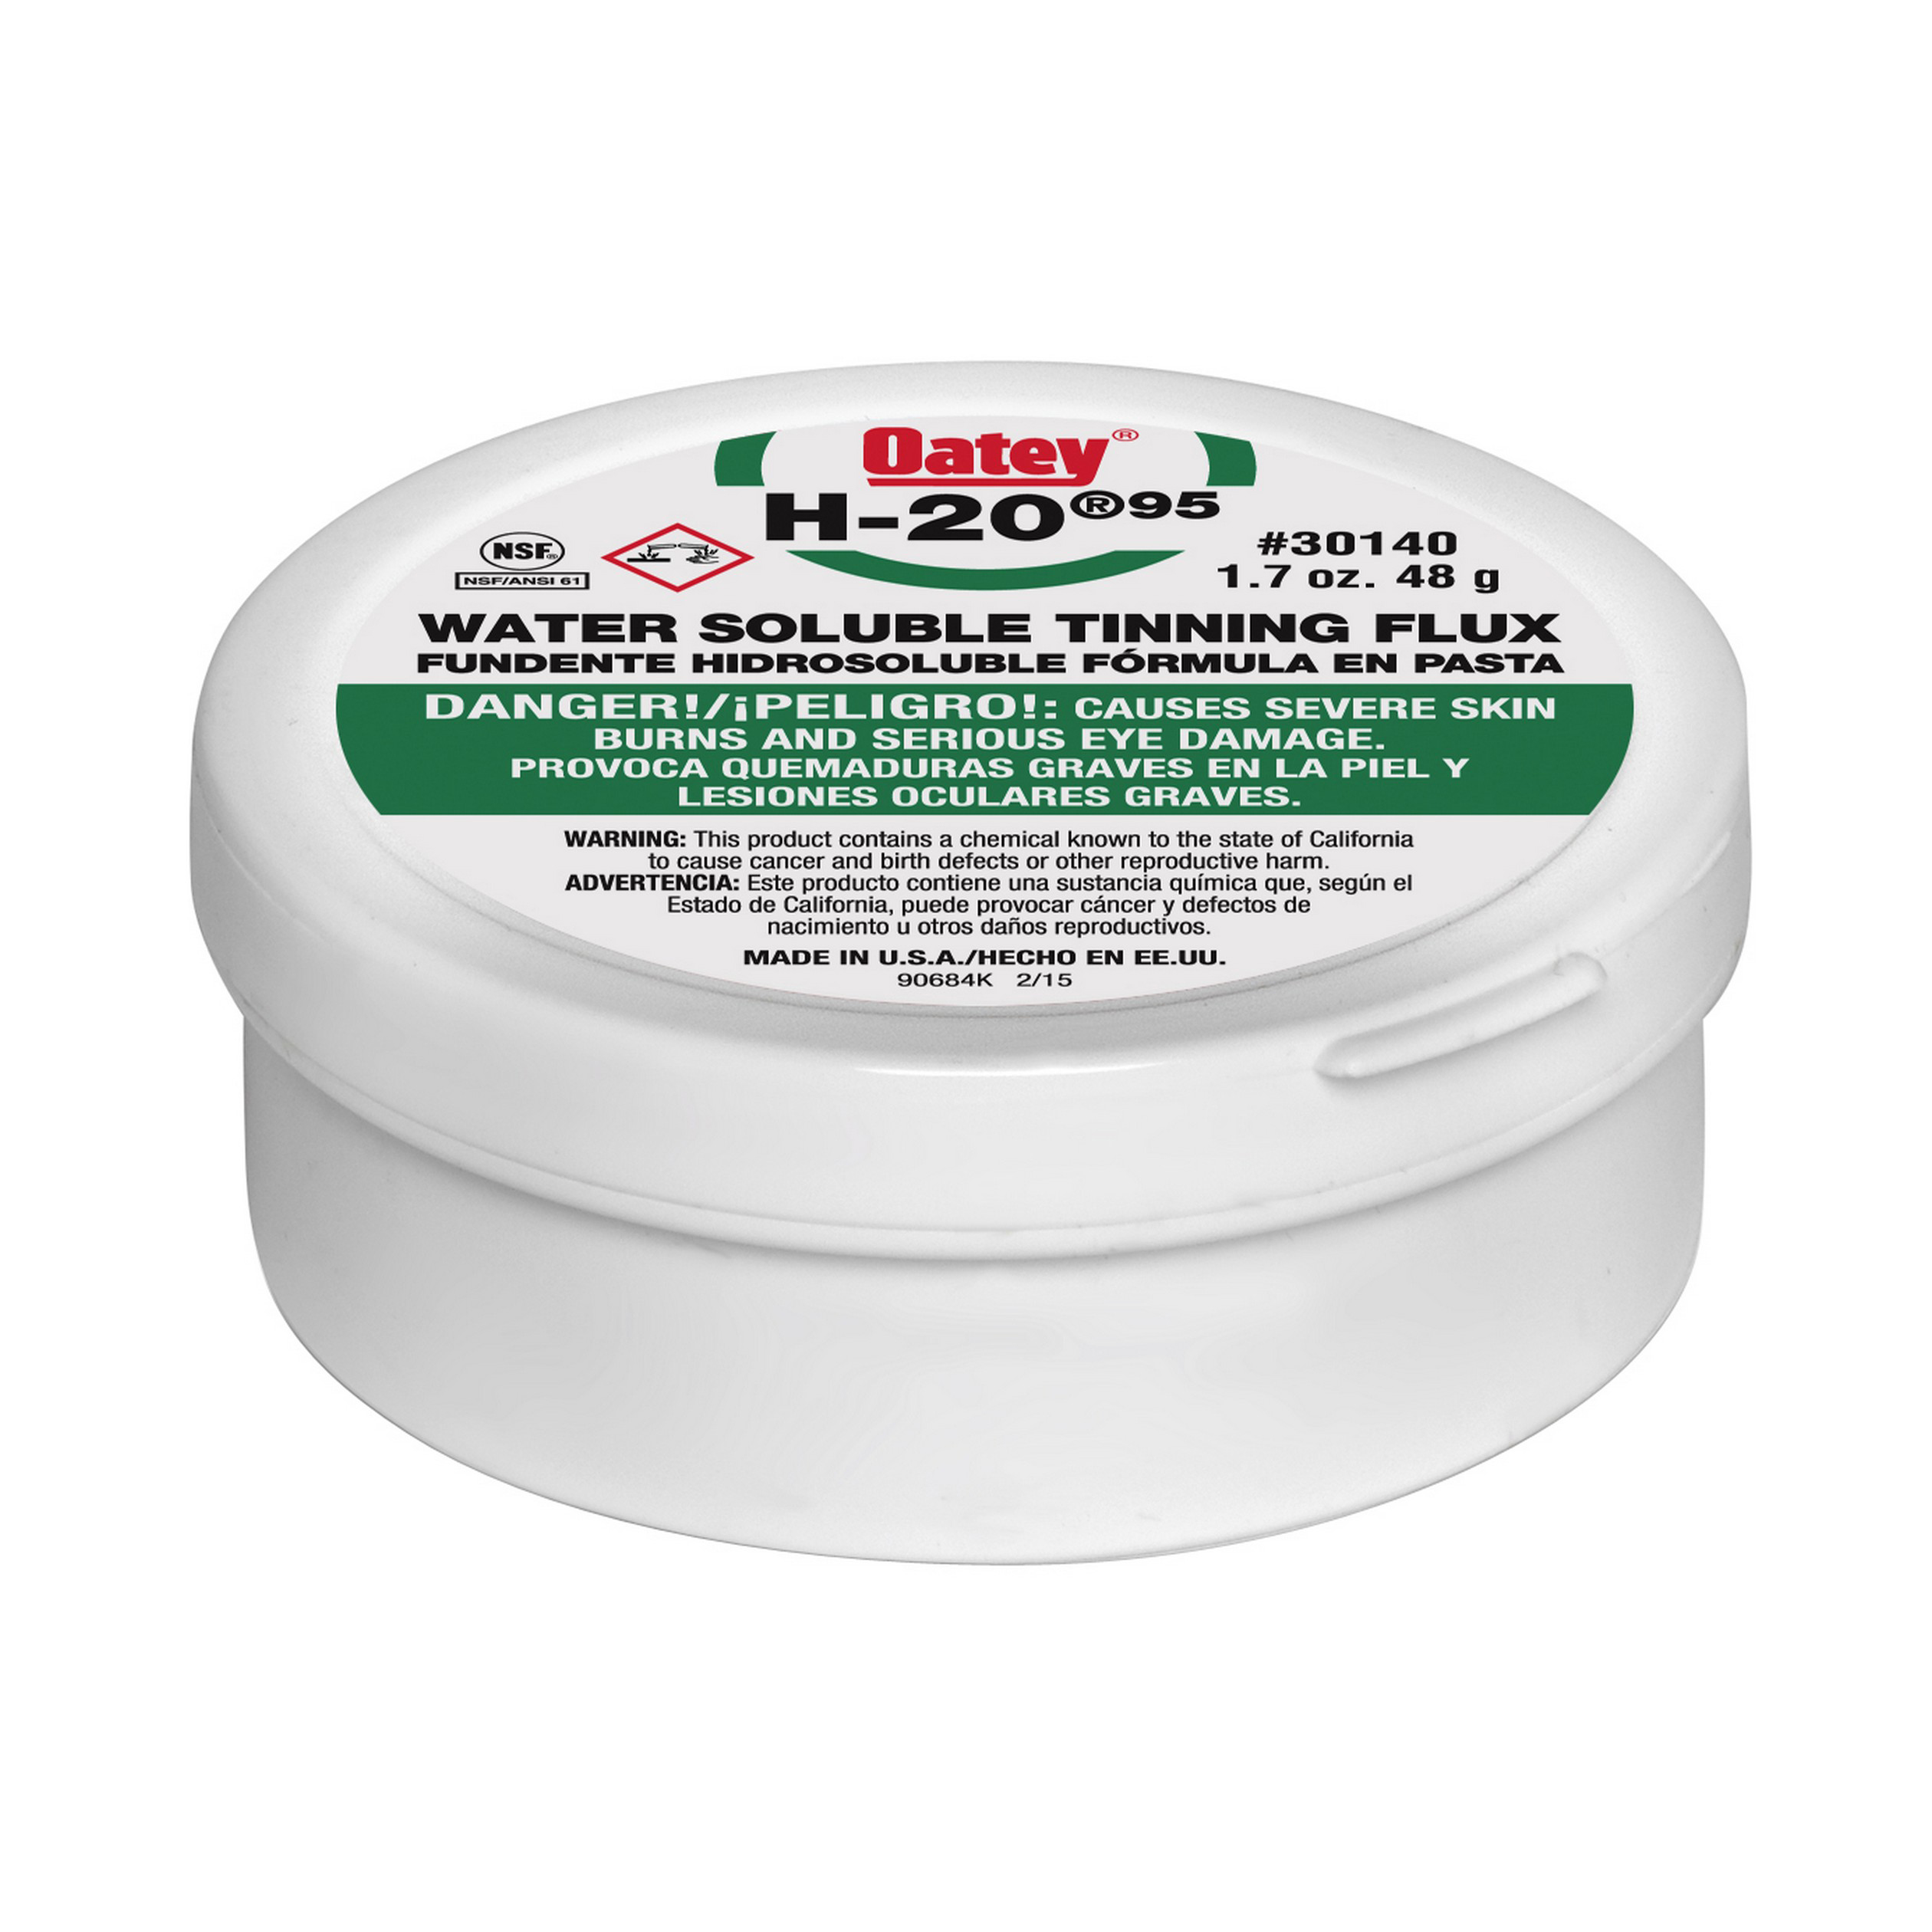 TINNING FLUX 1.7 OZ NO. H2095 30140 - WATER SOLUBLE PASTE